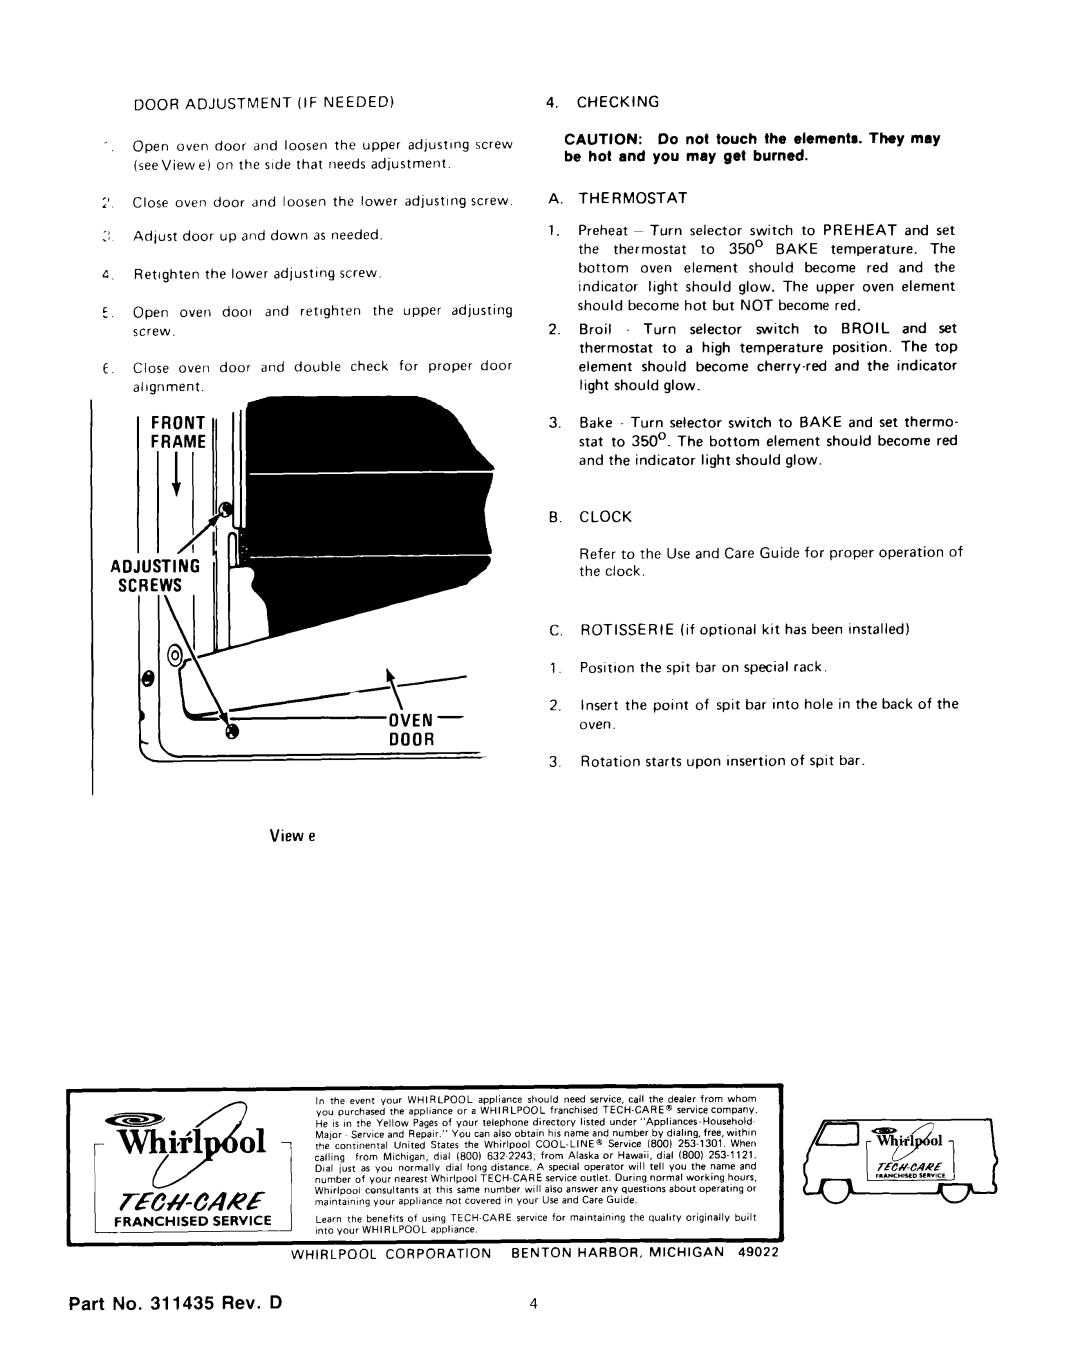 Whirlpool manual Adjusting, Front Frame, OVEN -oven DOOR, View e, Part No. 311435 Rev. D 